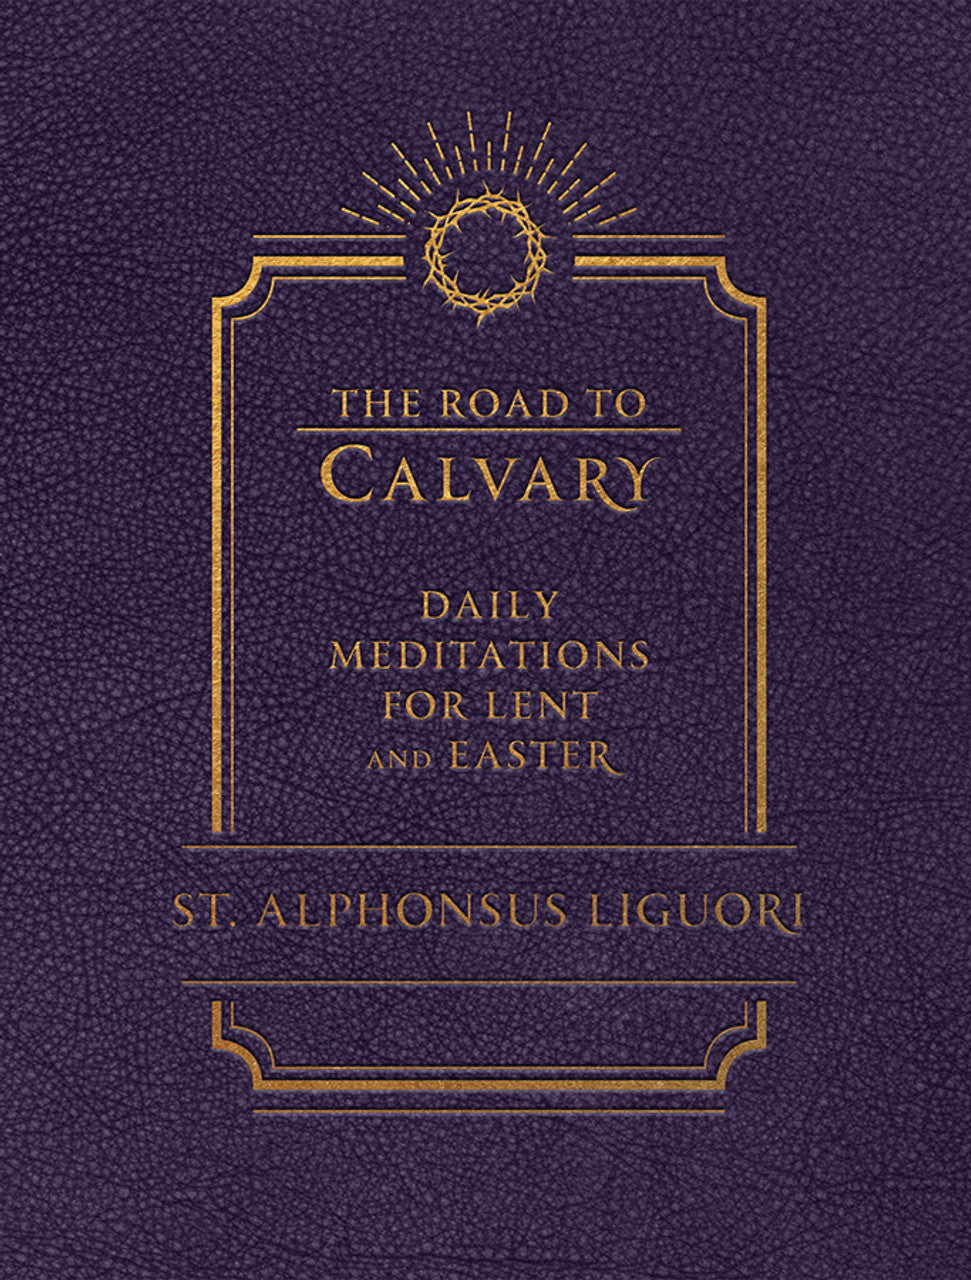 The Road to Calvary: Daily Meditations for Lent and Easter